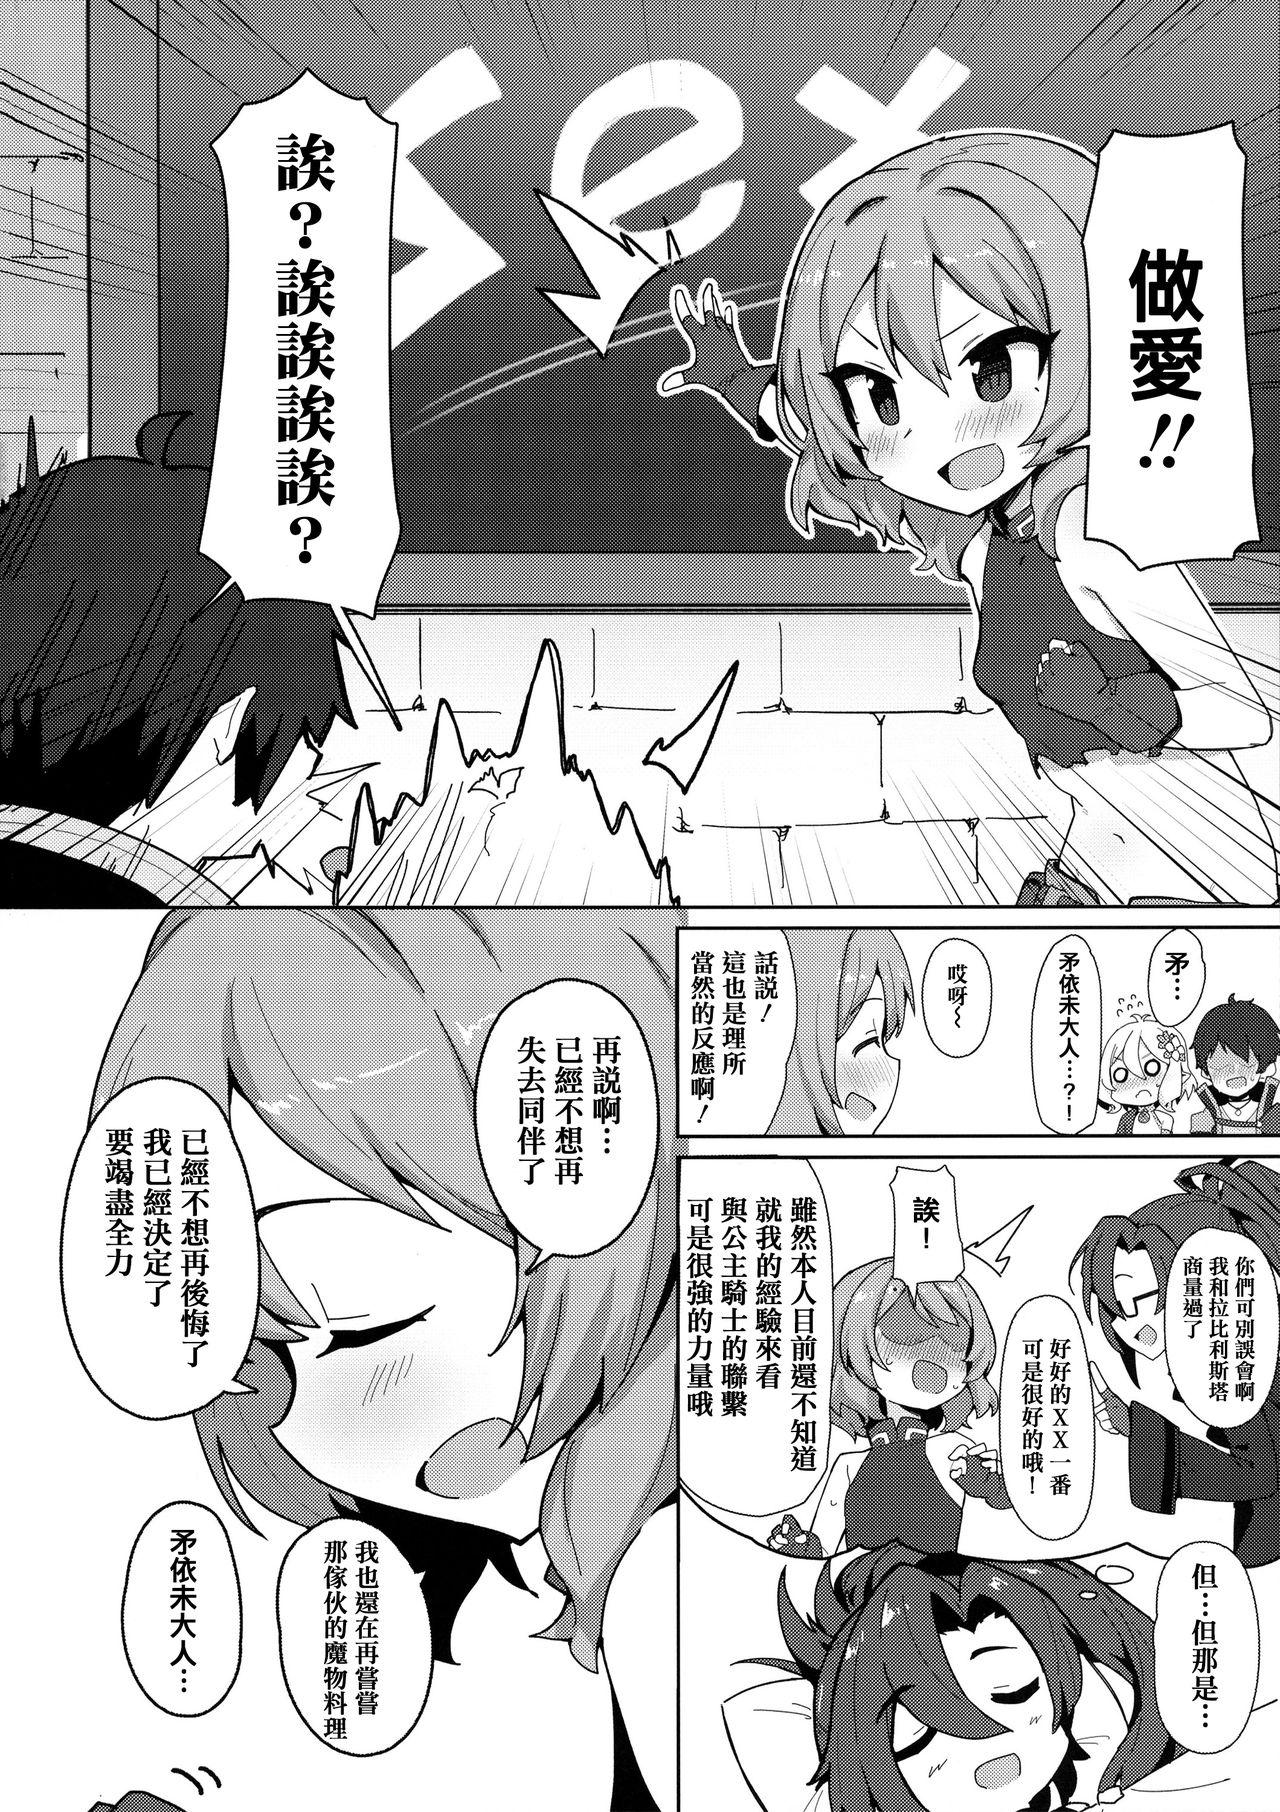 Whipping Minna to Connect de Dairankou - Princess connect All - Page 4